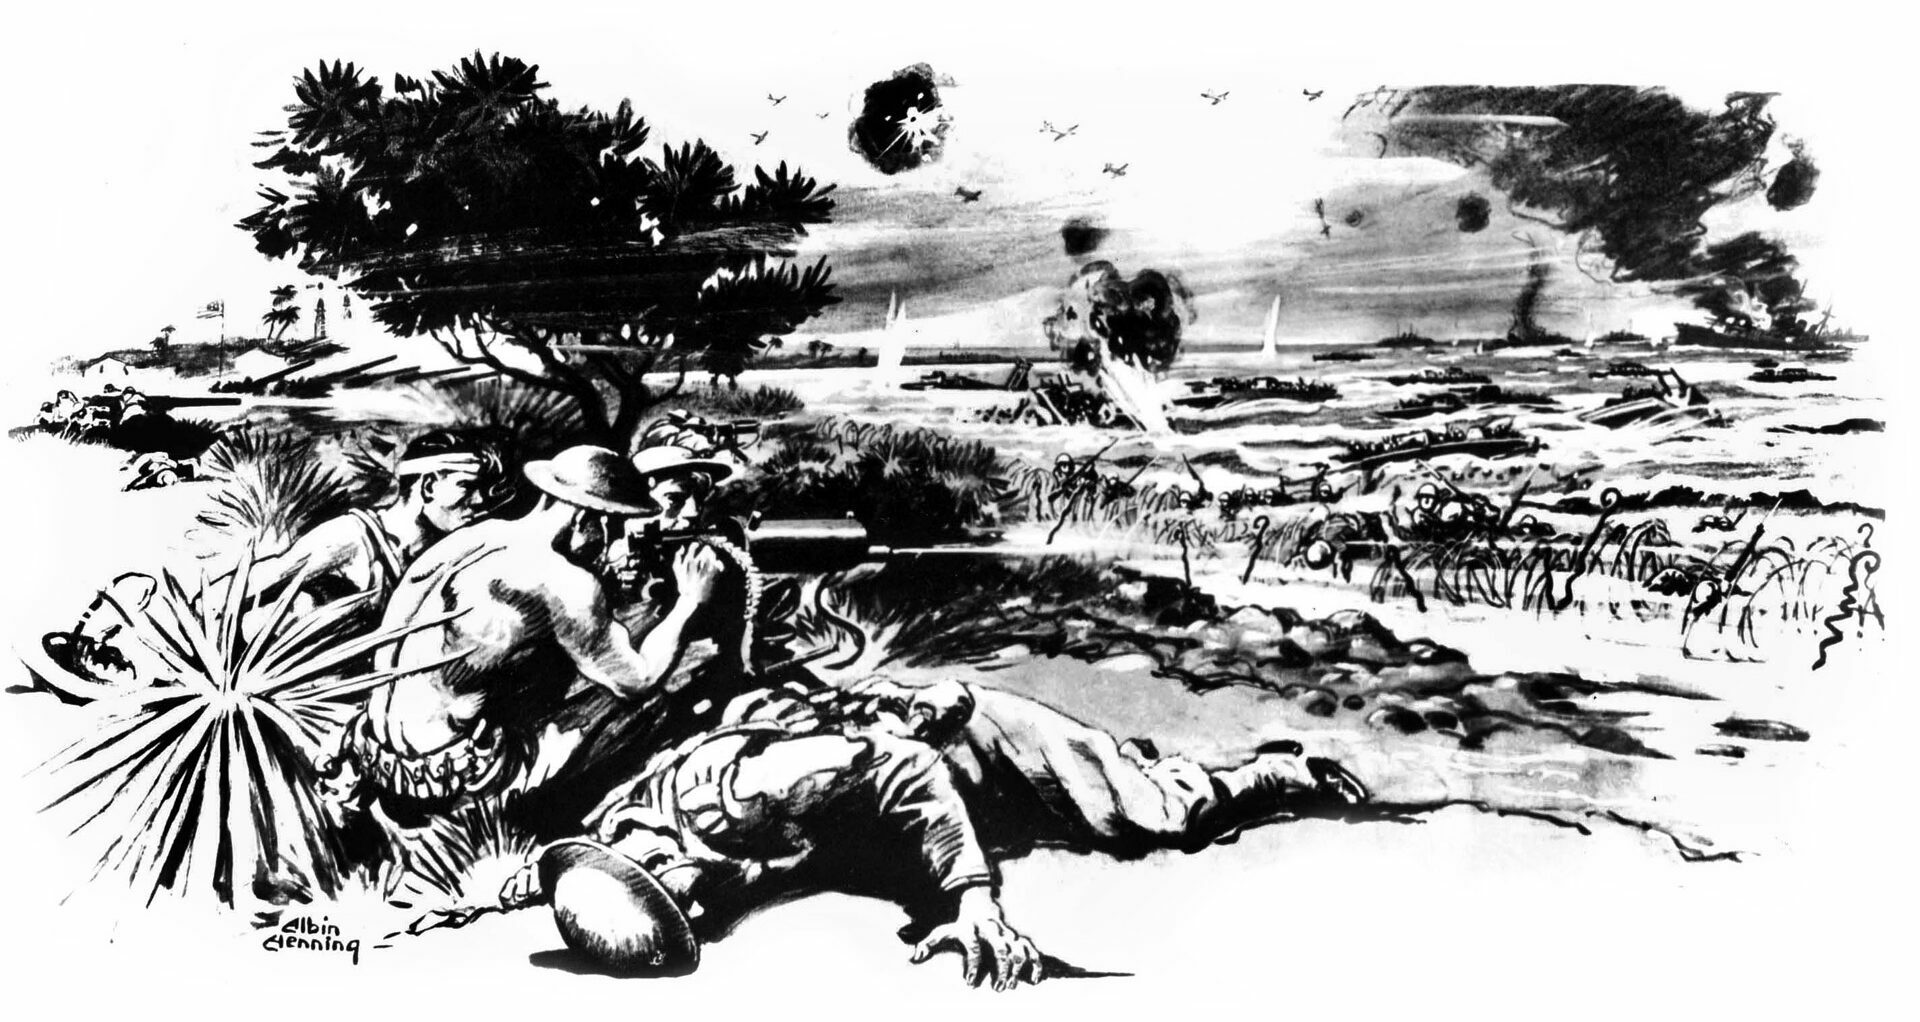 American machine gunners hold off the invading Japanese force. While inaccurate in some details (the artist invented the barbed wire for dramatic effect; no such obstruction existed on Wake Island), it does capture the desperate nature of the Marines’ last stand. 